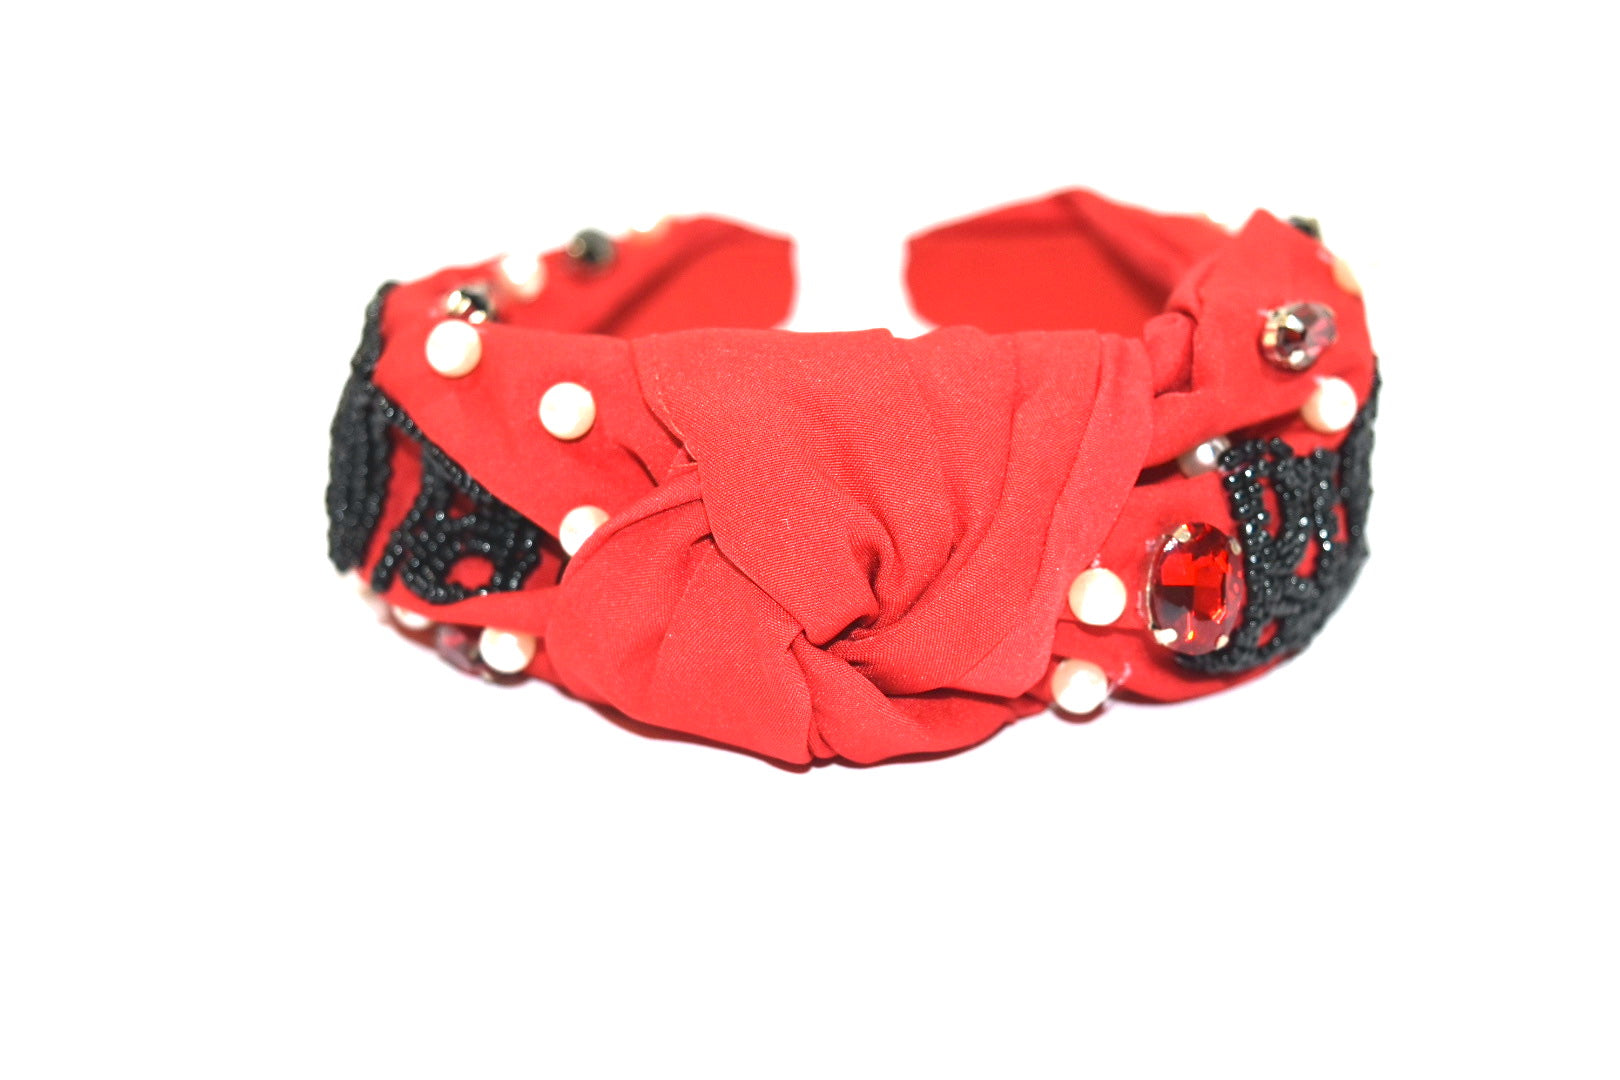 Red headband with black beaded "bulldog" lettering, crystals, and pearls.  Top view.